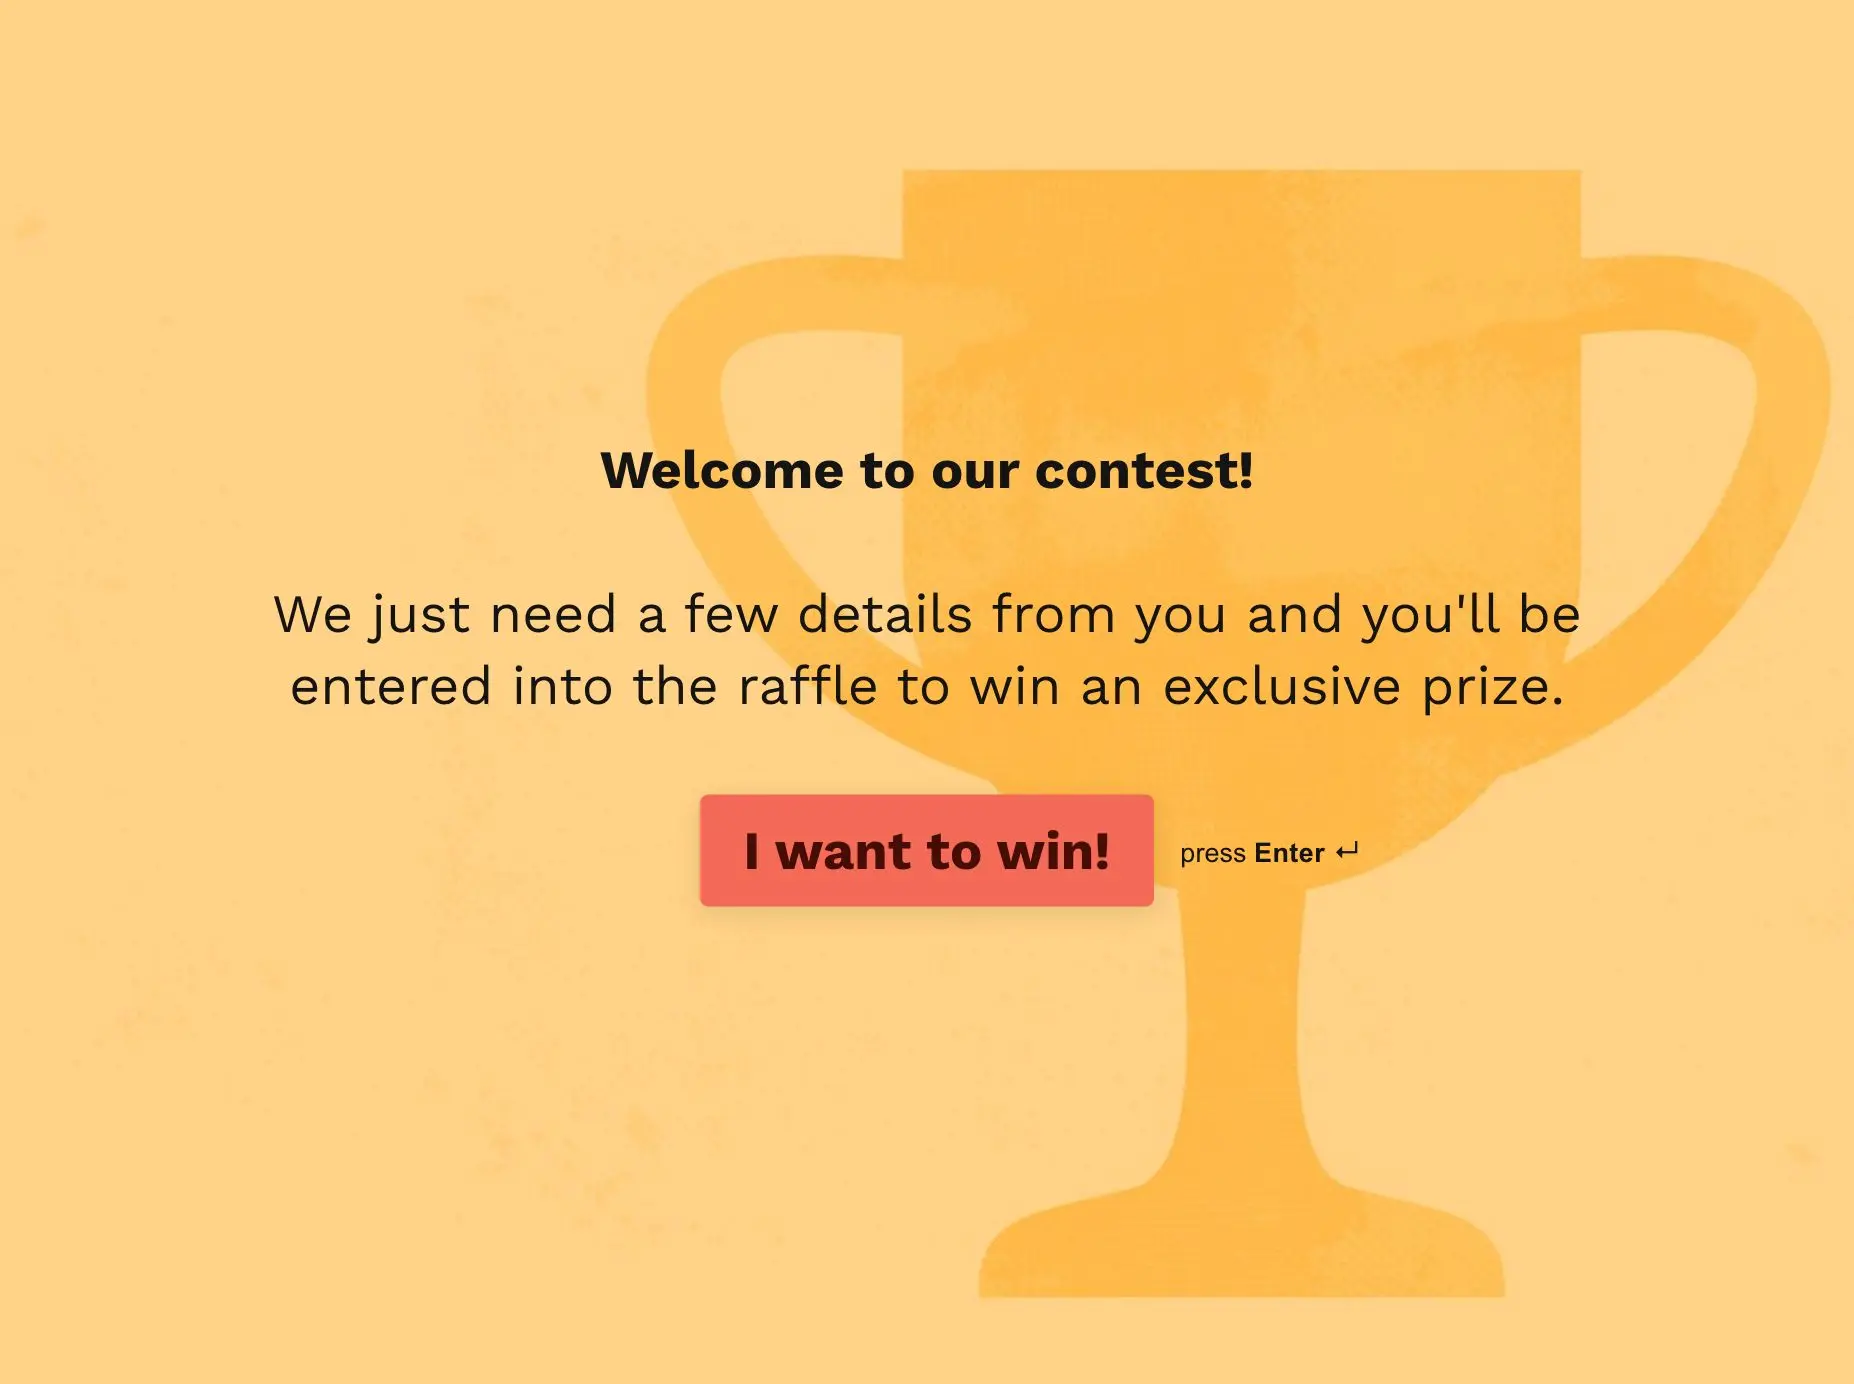 Contest-related design templates